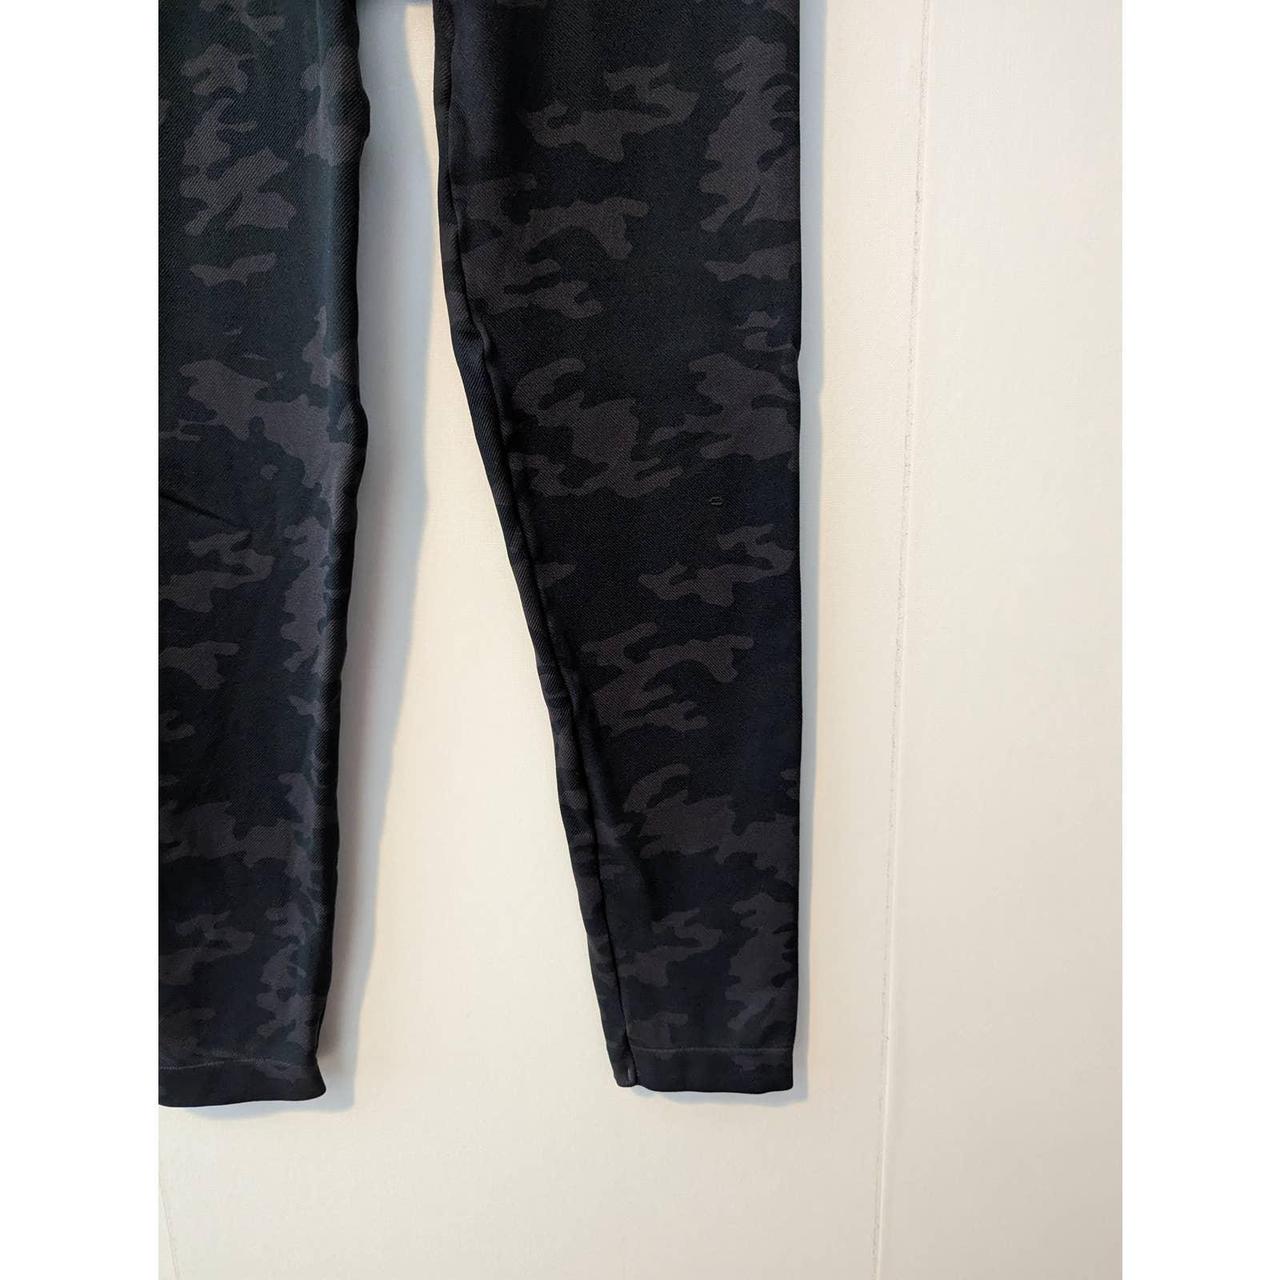 Spanx Look At Me Now Seamless Leggings XL Black Blue Camo High Rise Stretch